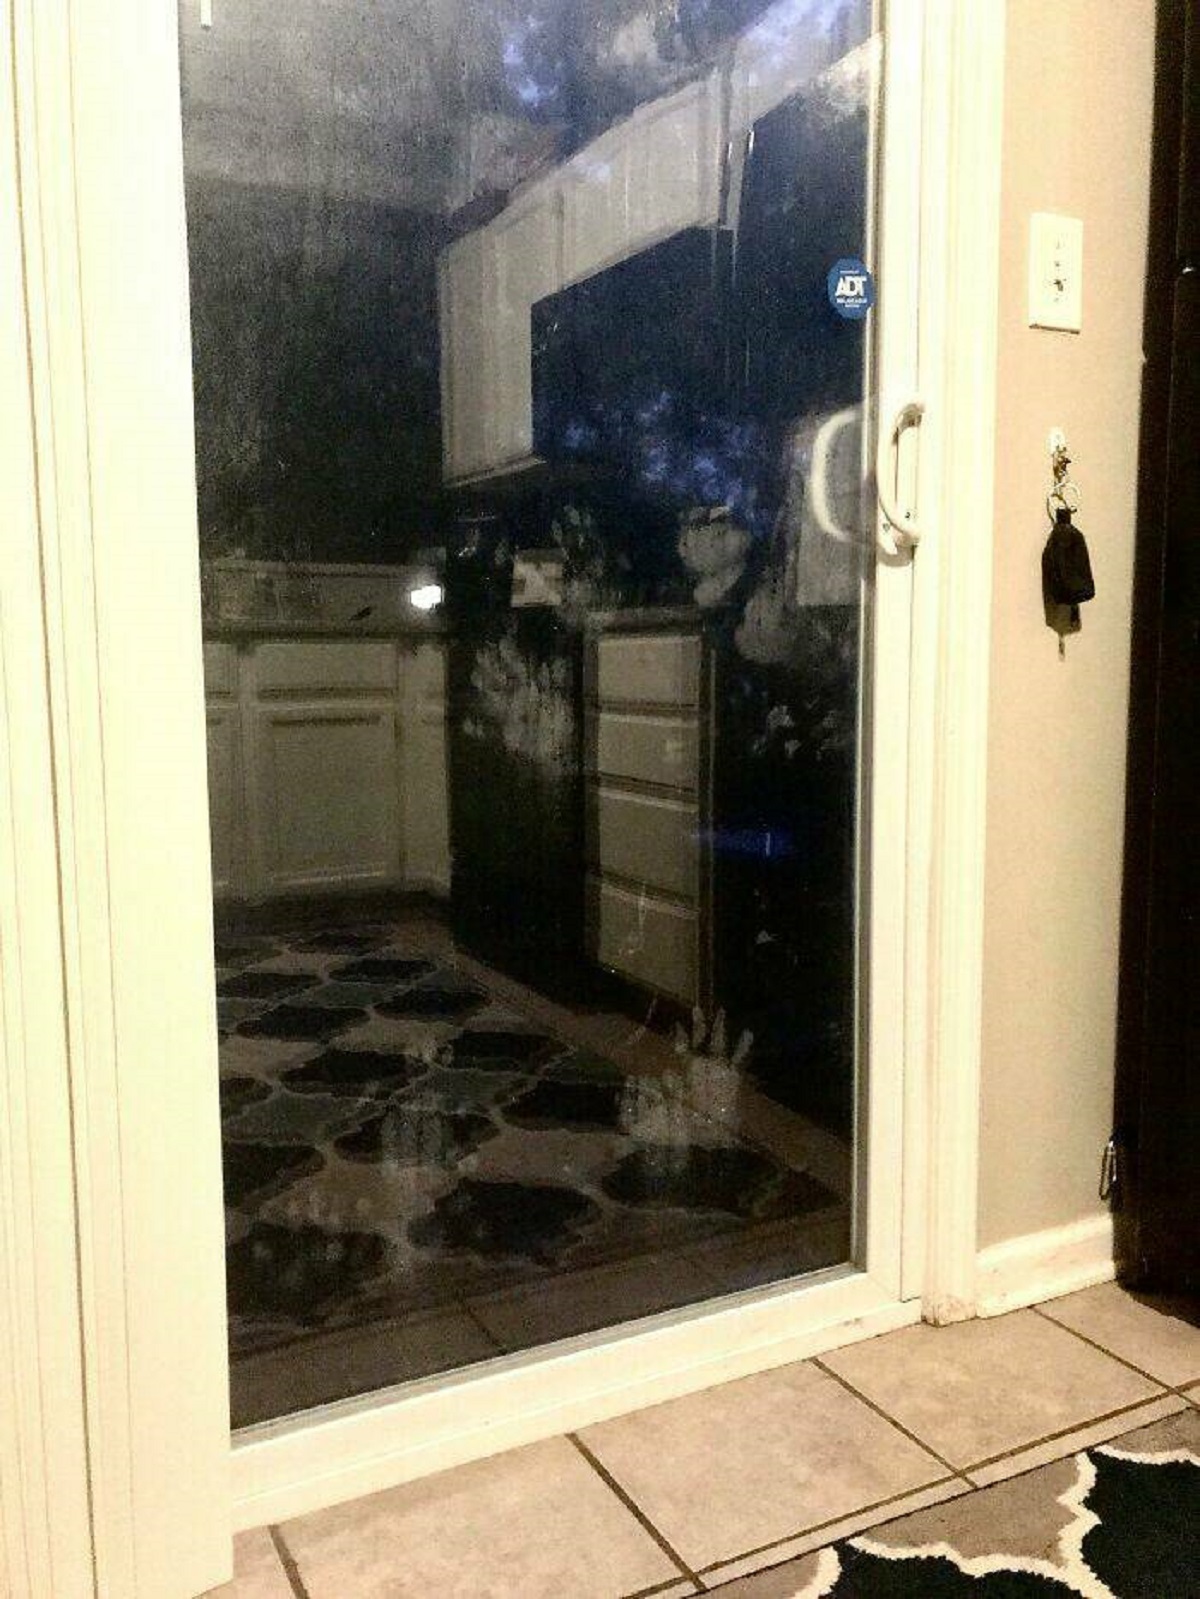 "These Hand/Paw Prints On My Back Door"